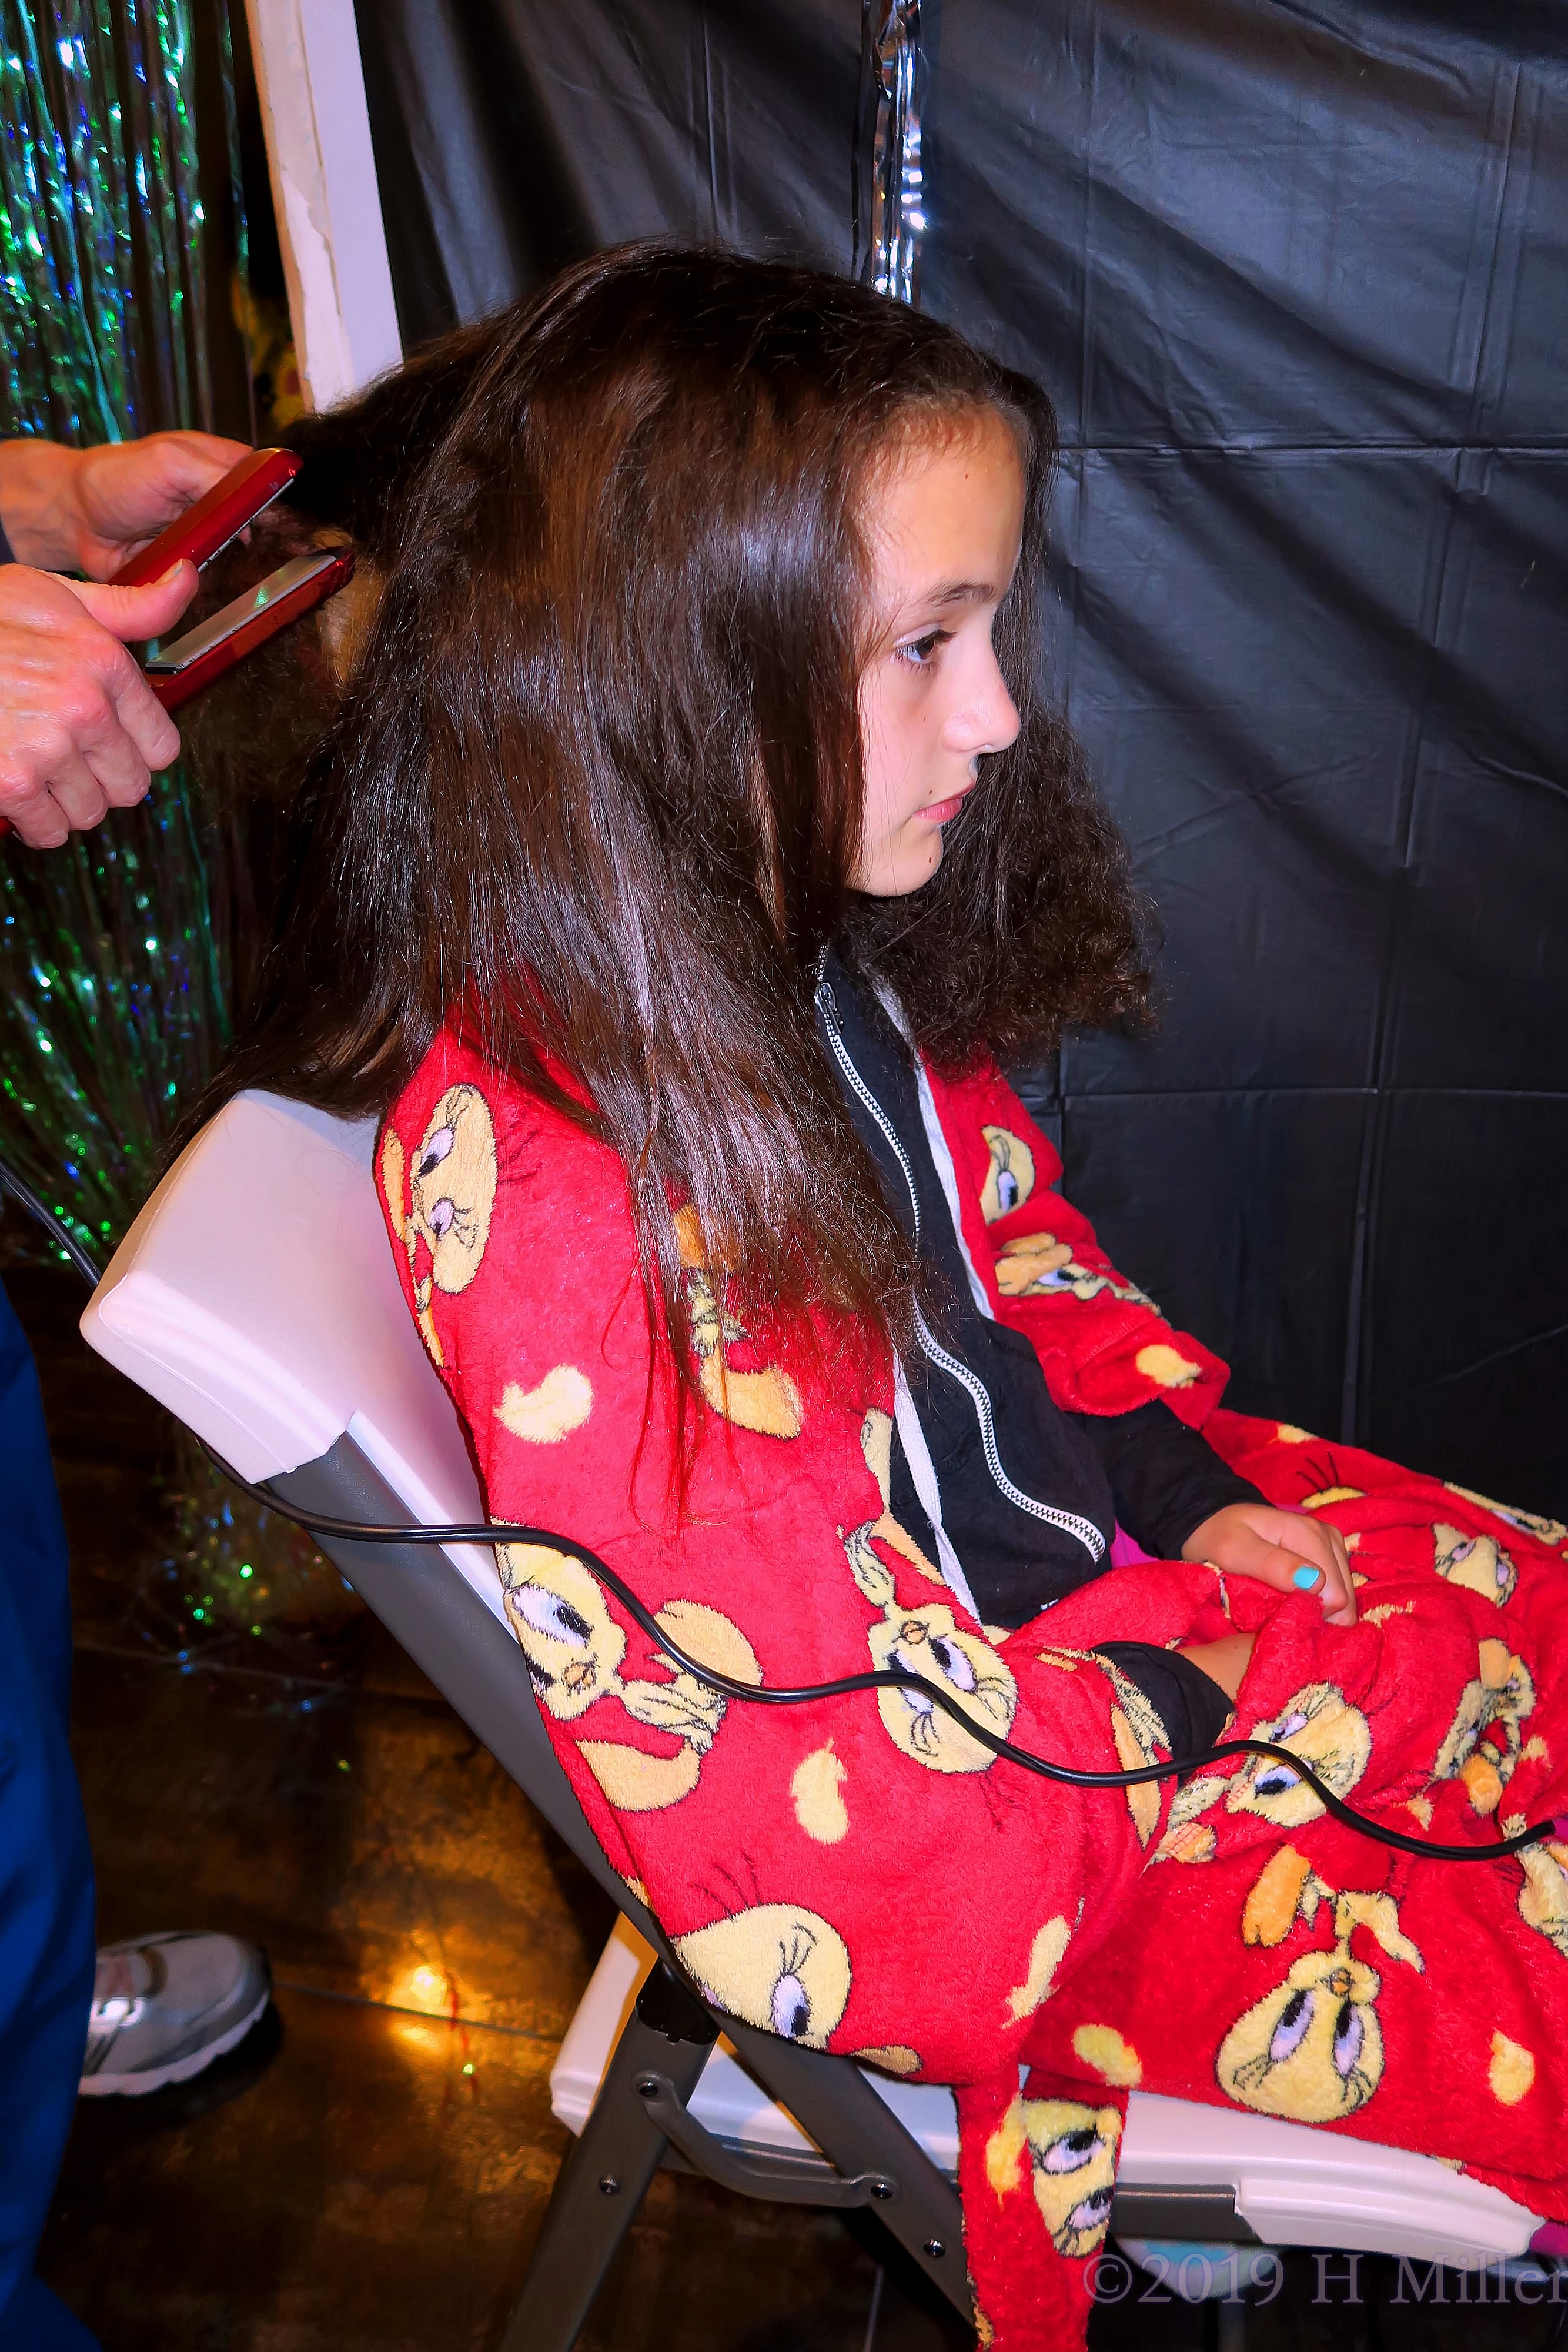 Taming The Curls With A Straightened Kids Hairstyle On This Party Guest! 4